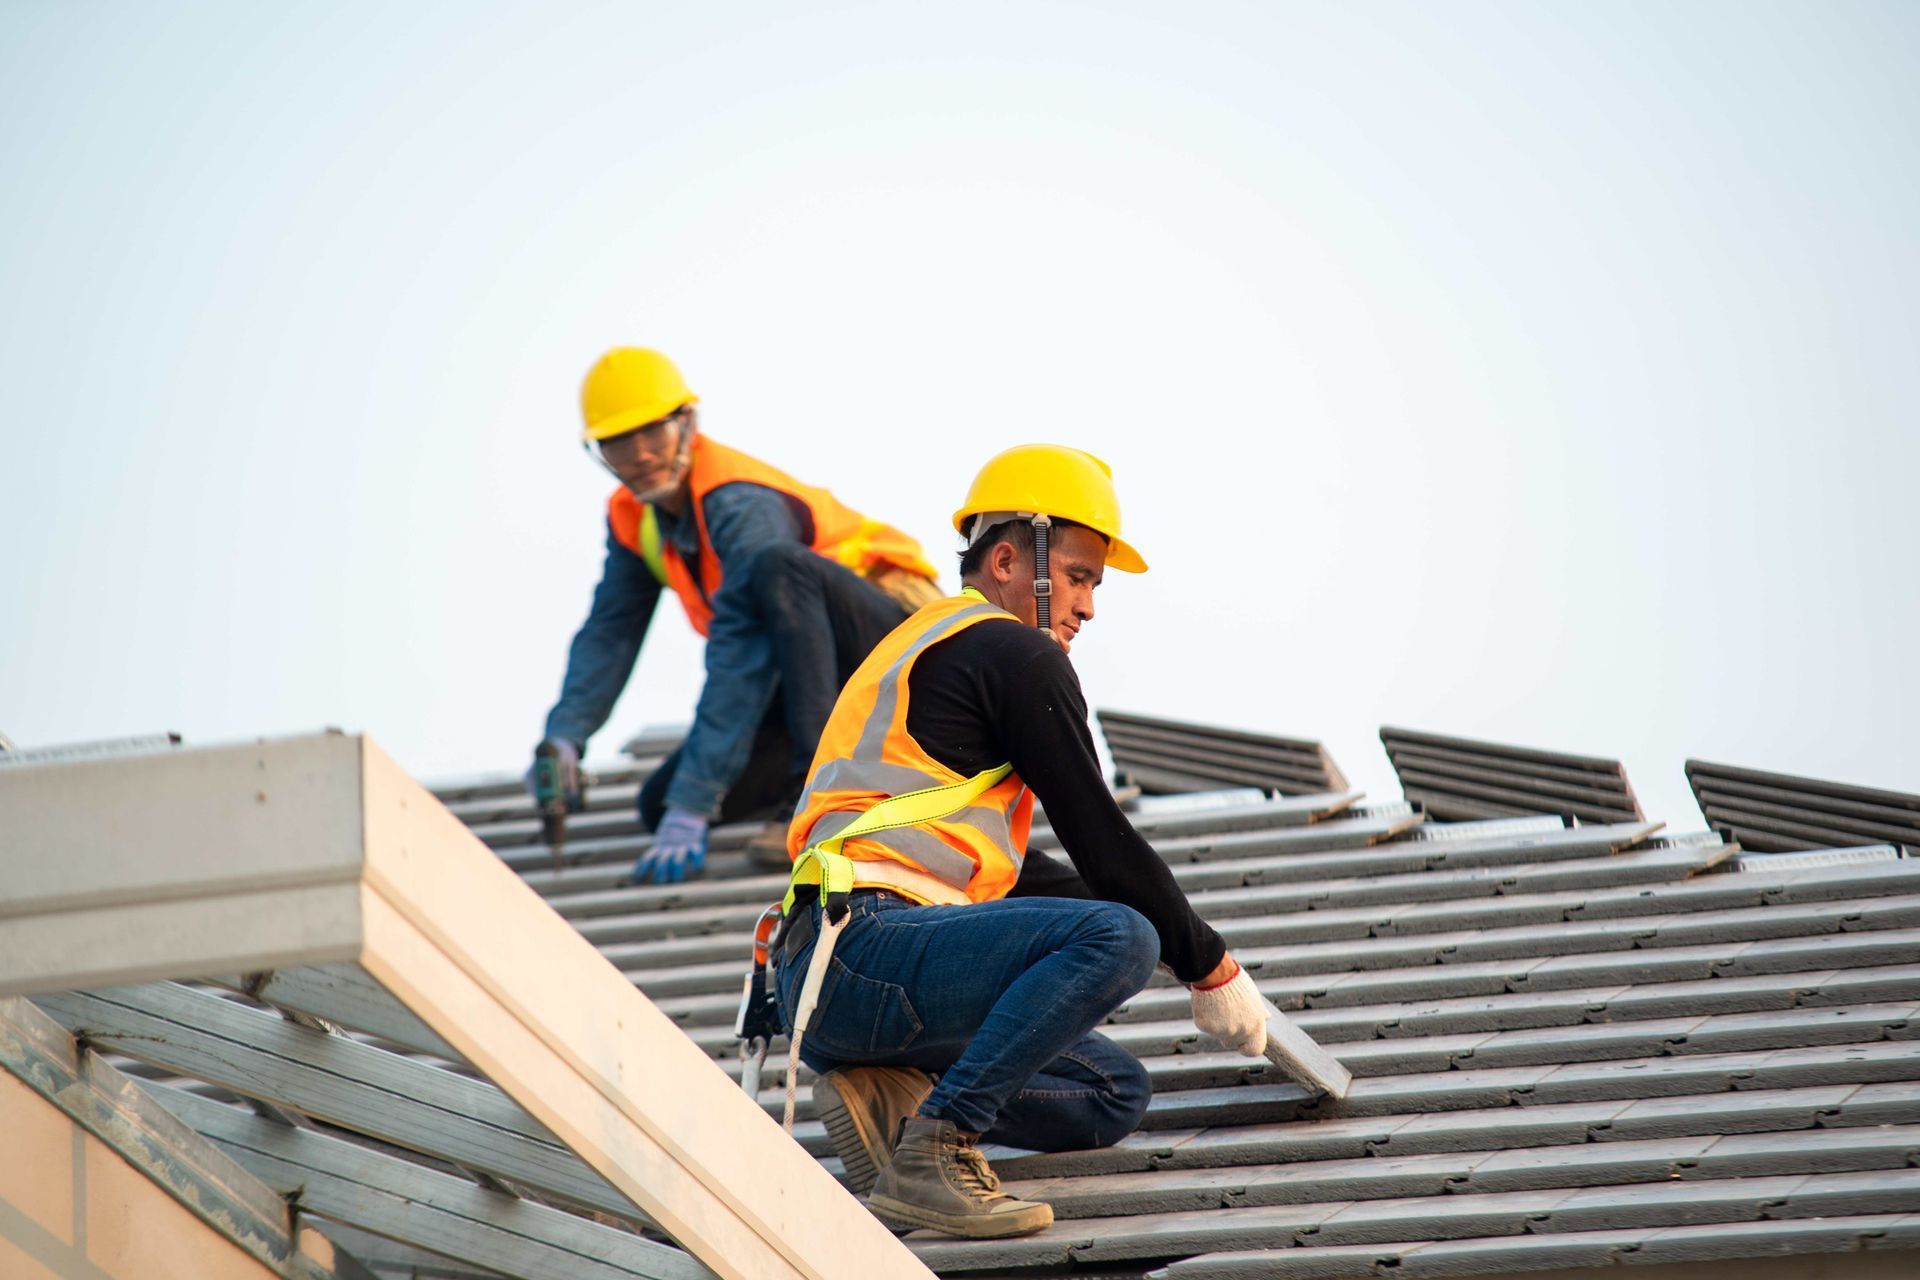 Two construction workers are working on the roof of a building.